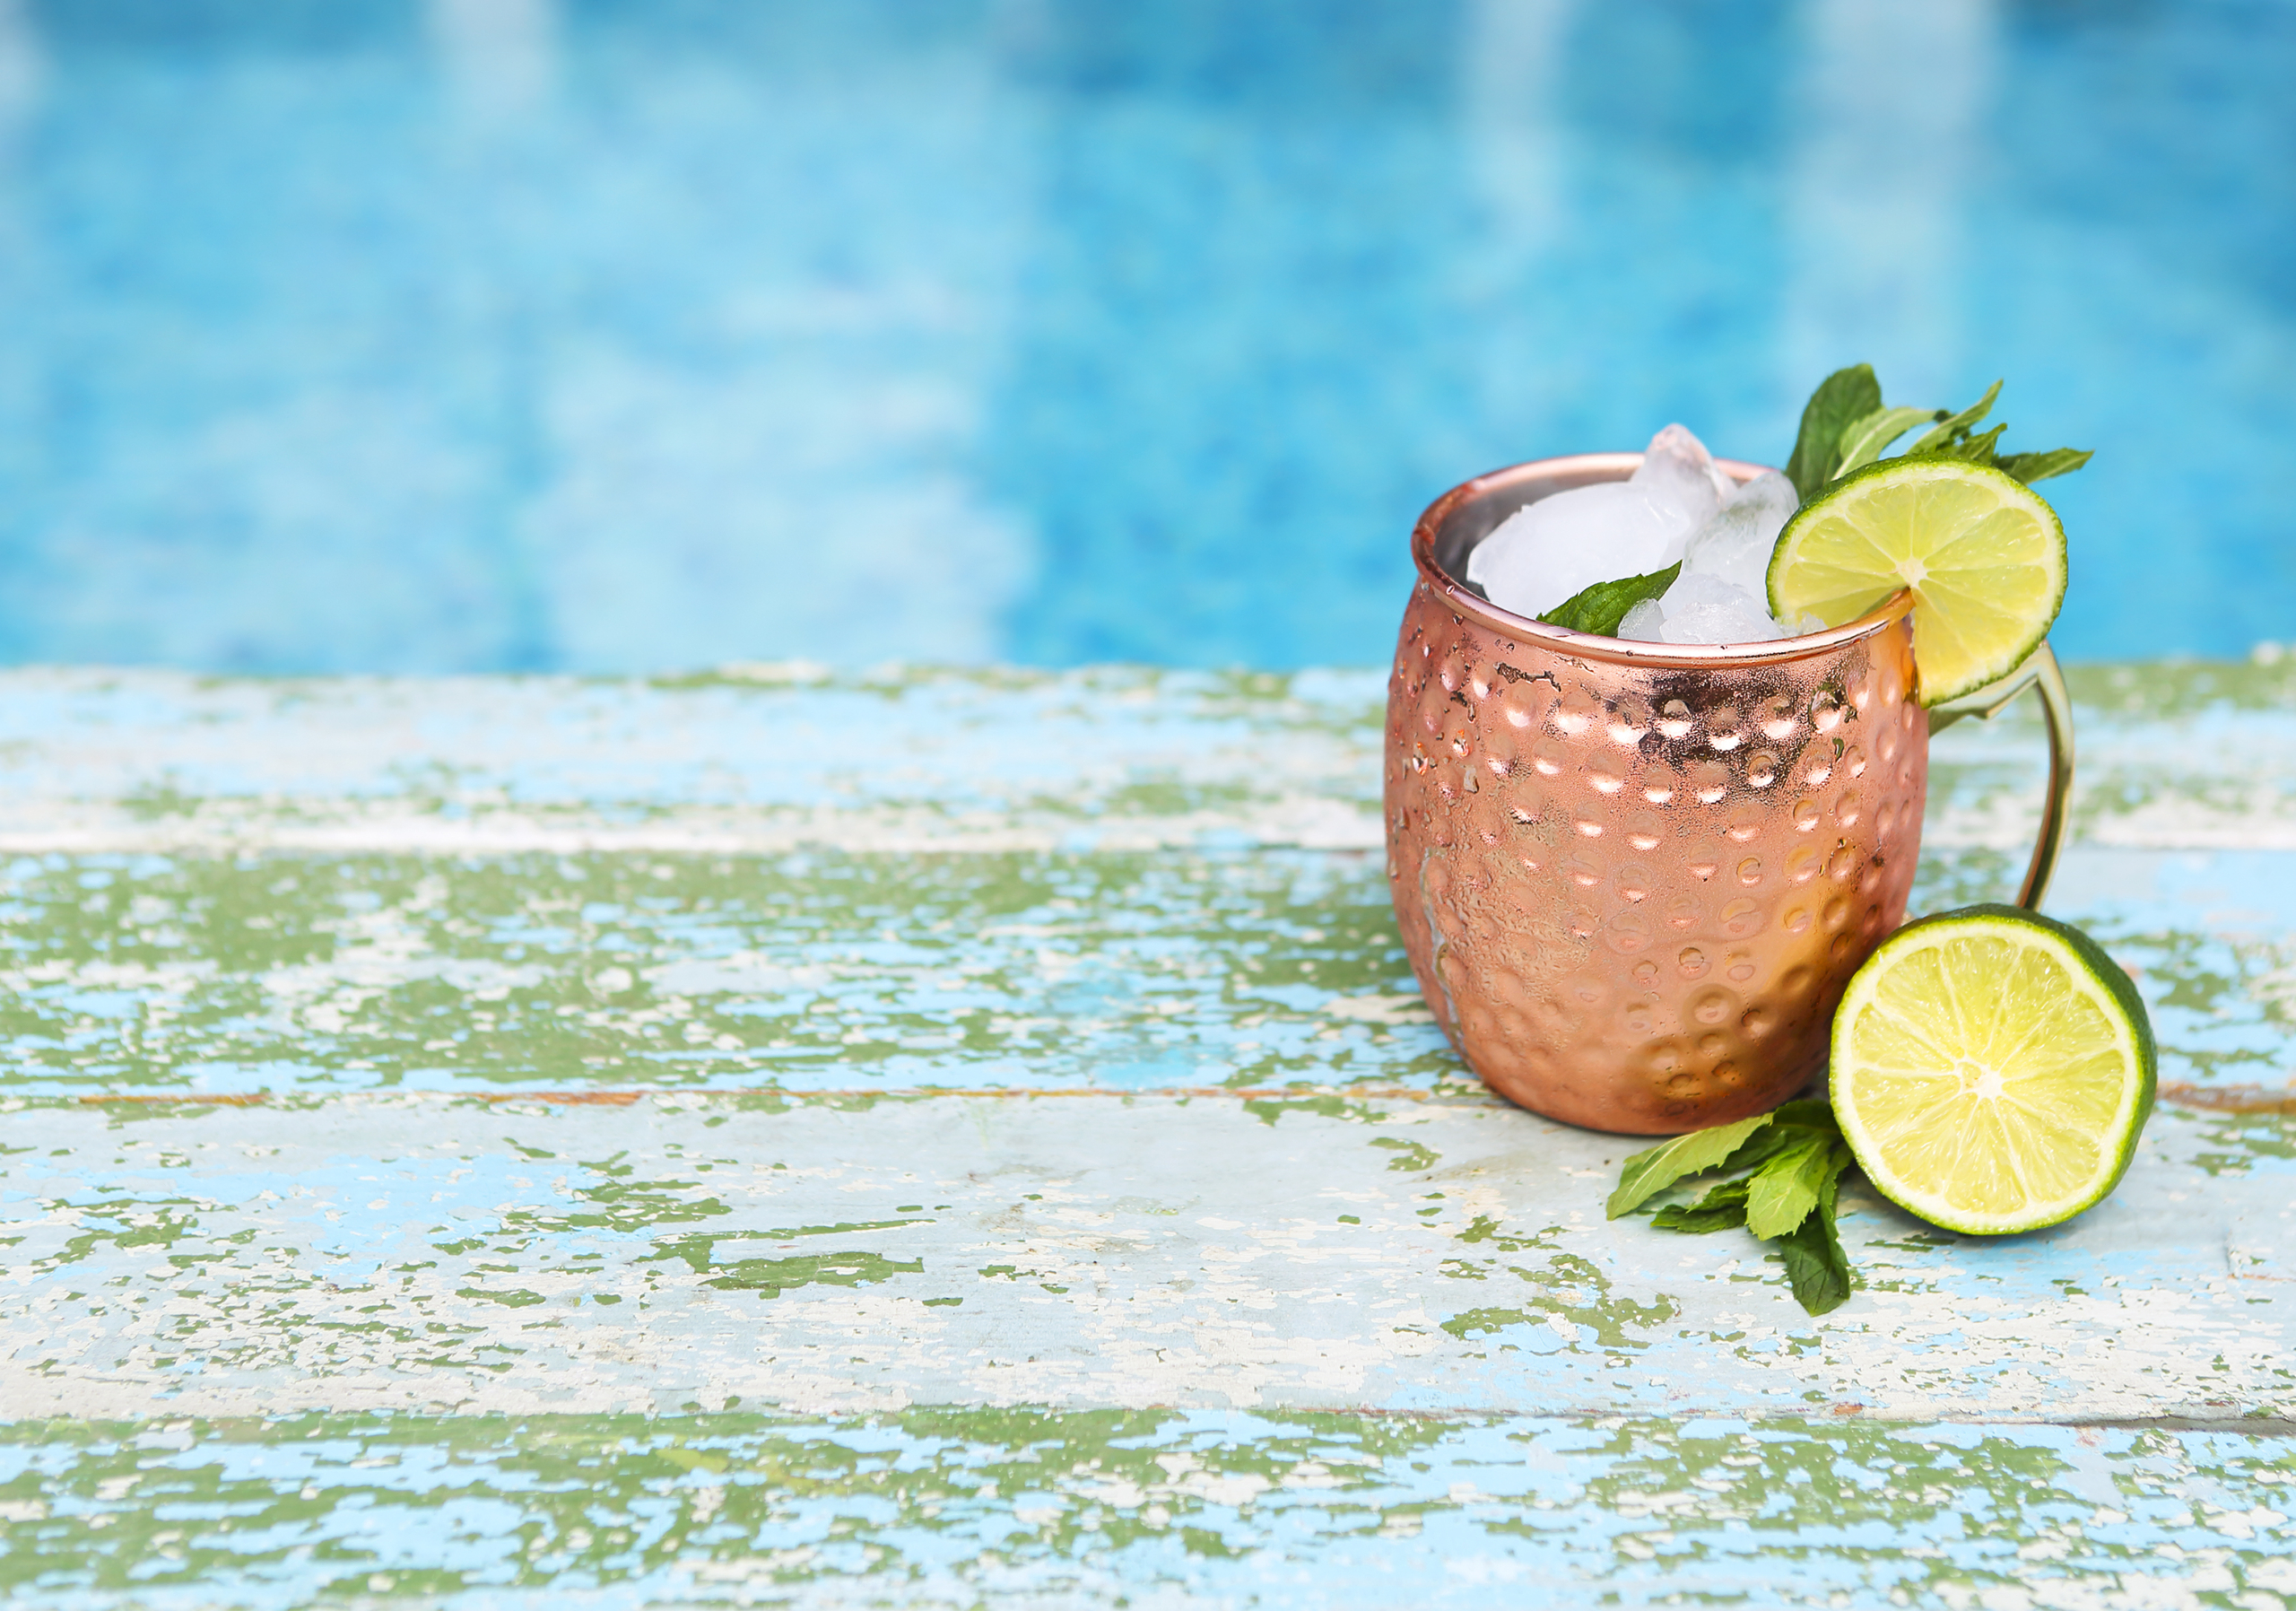 Moscow mule summer cocktails